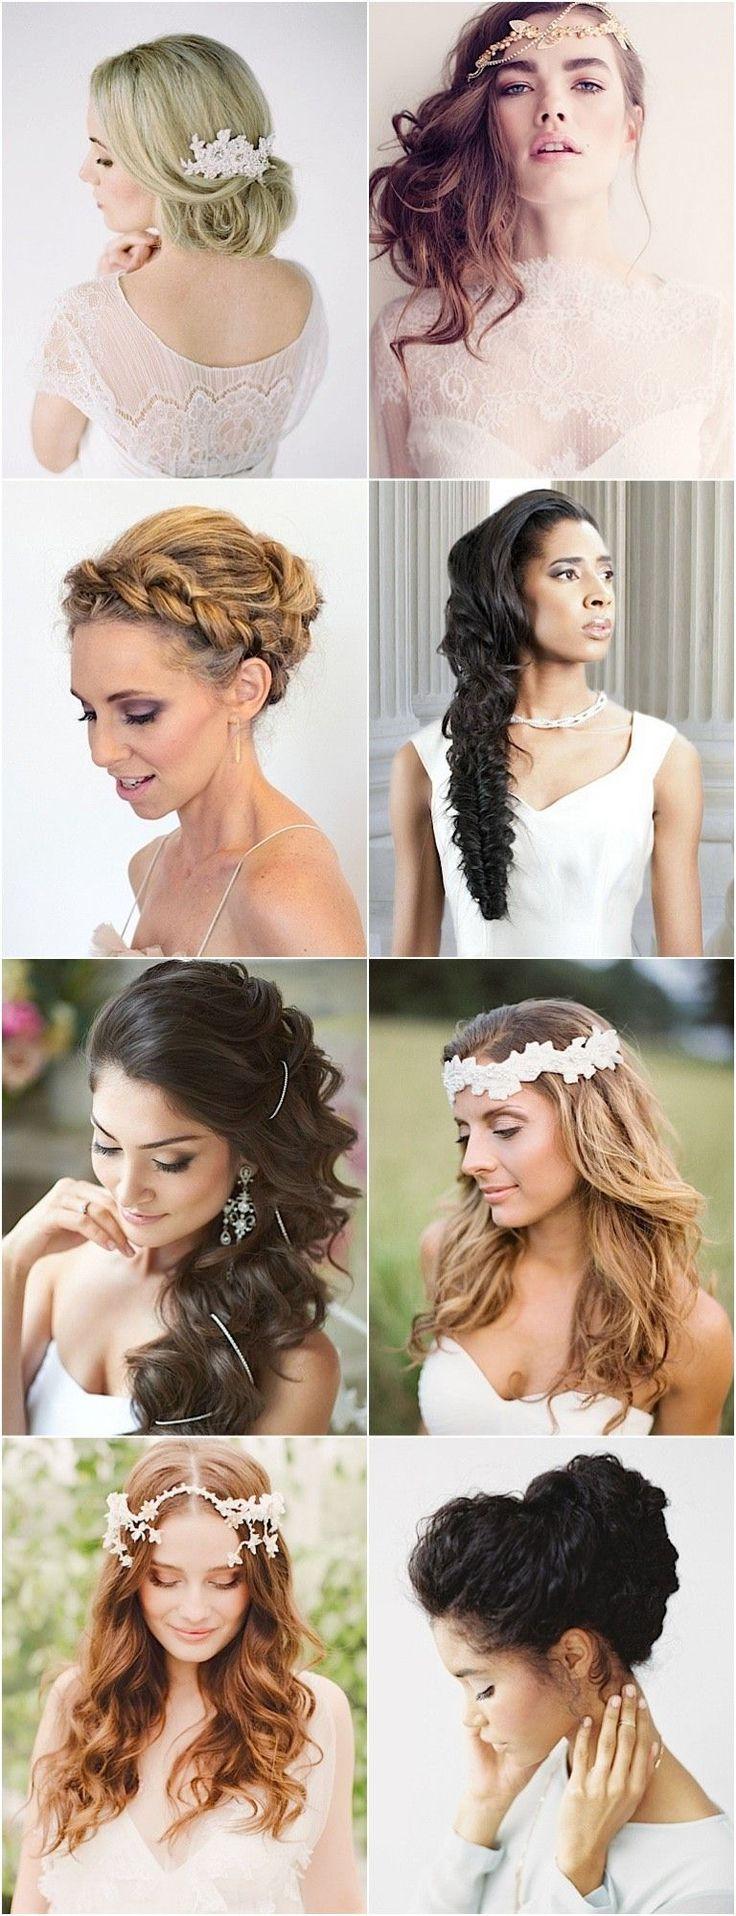 Wedding - 22 Romantic Wedding Hairstyles For Every Bride